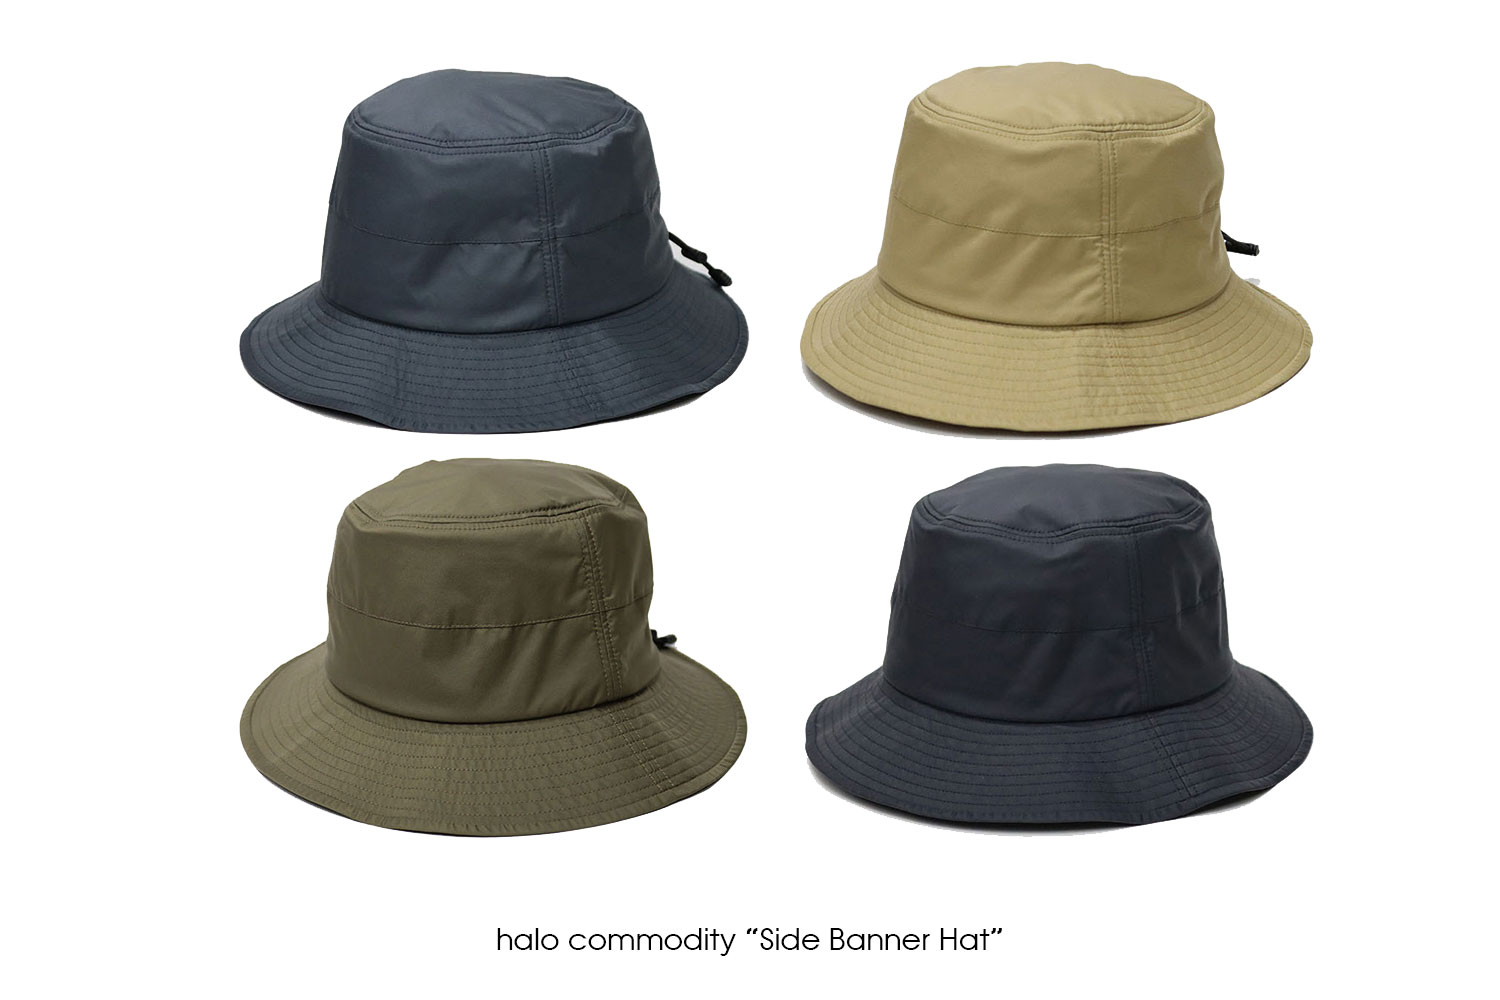 halo commodity "Side Banner Hat"